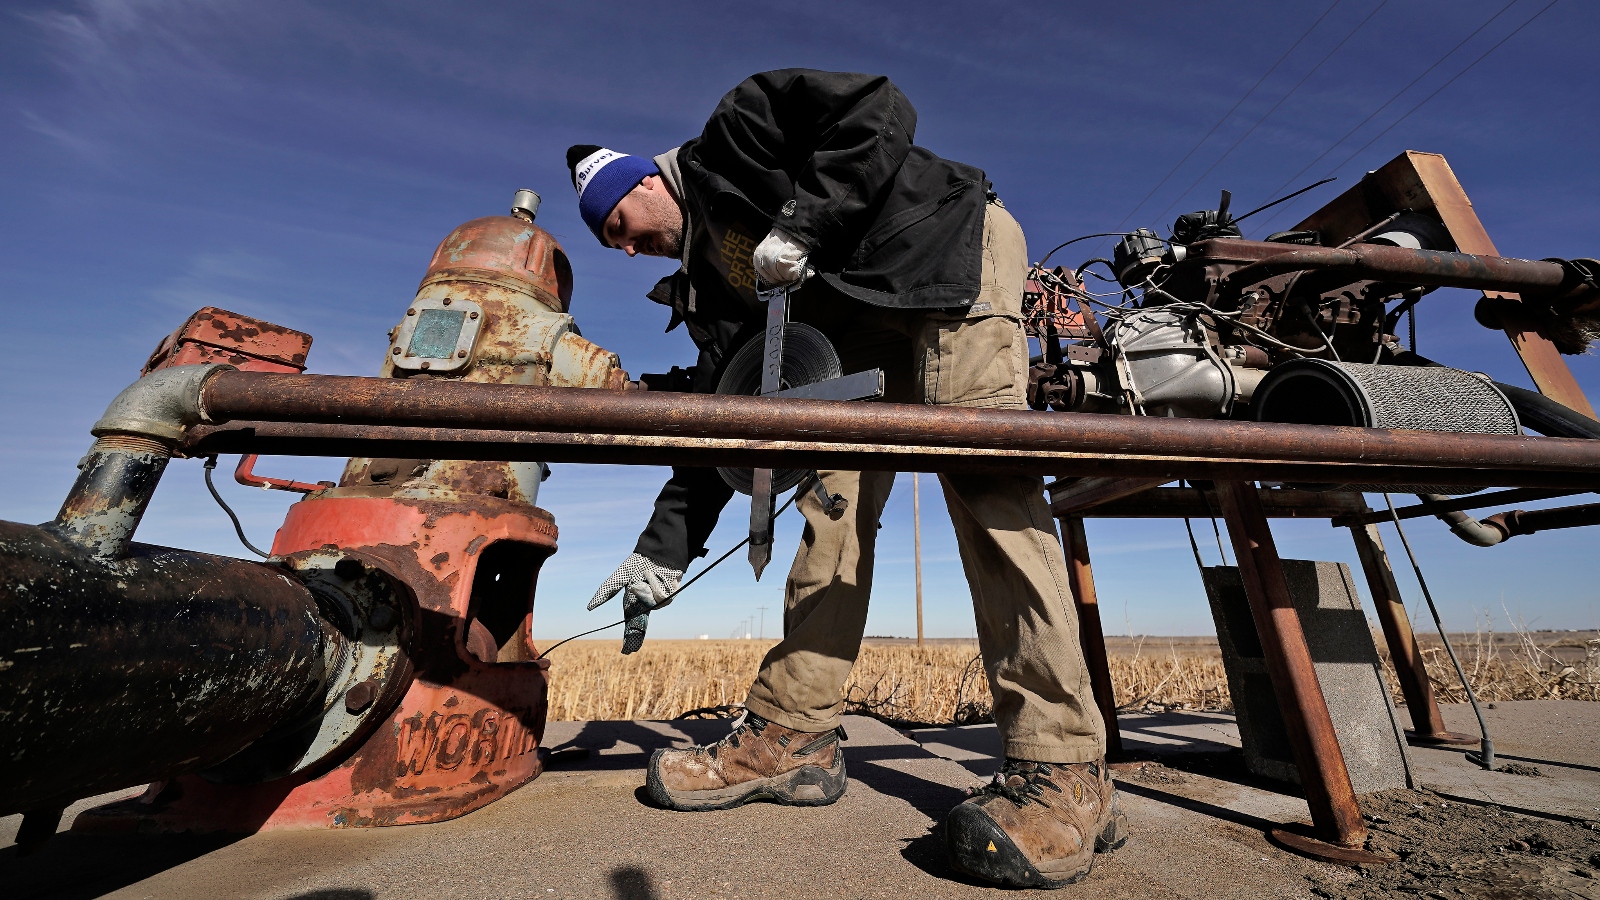 A researcher measures water levels in an irrigation well near Marienthal, Kansas. Water levels in the state's Ogallala Aquifer have been declining for decades.